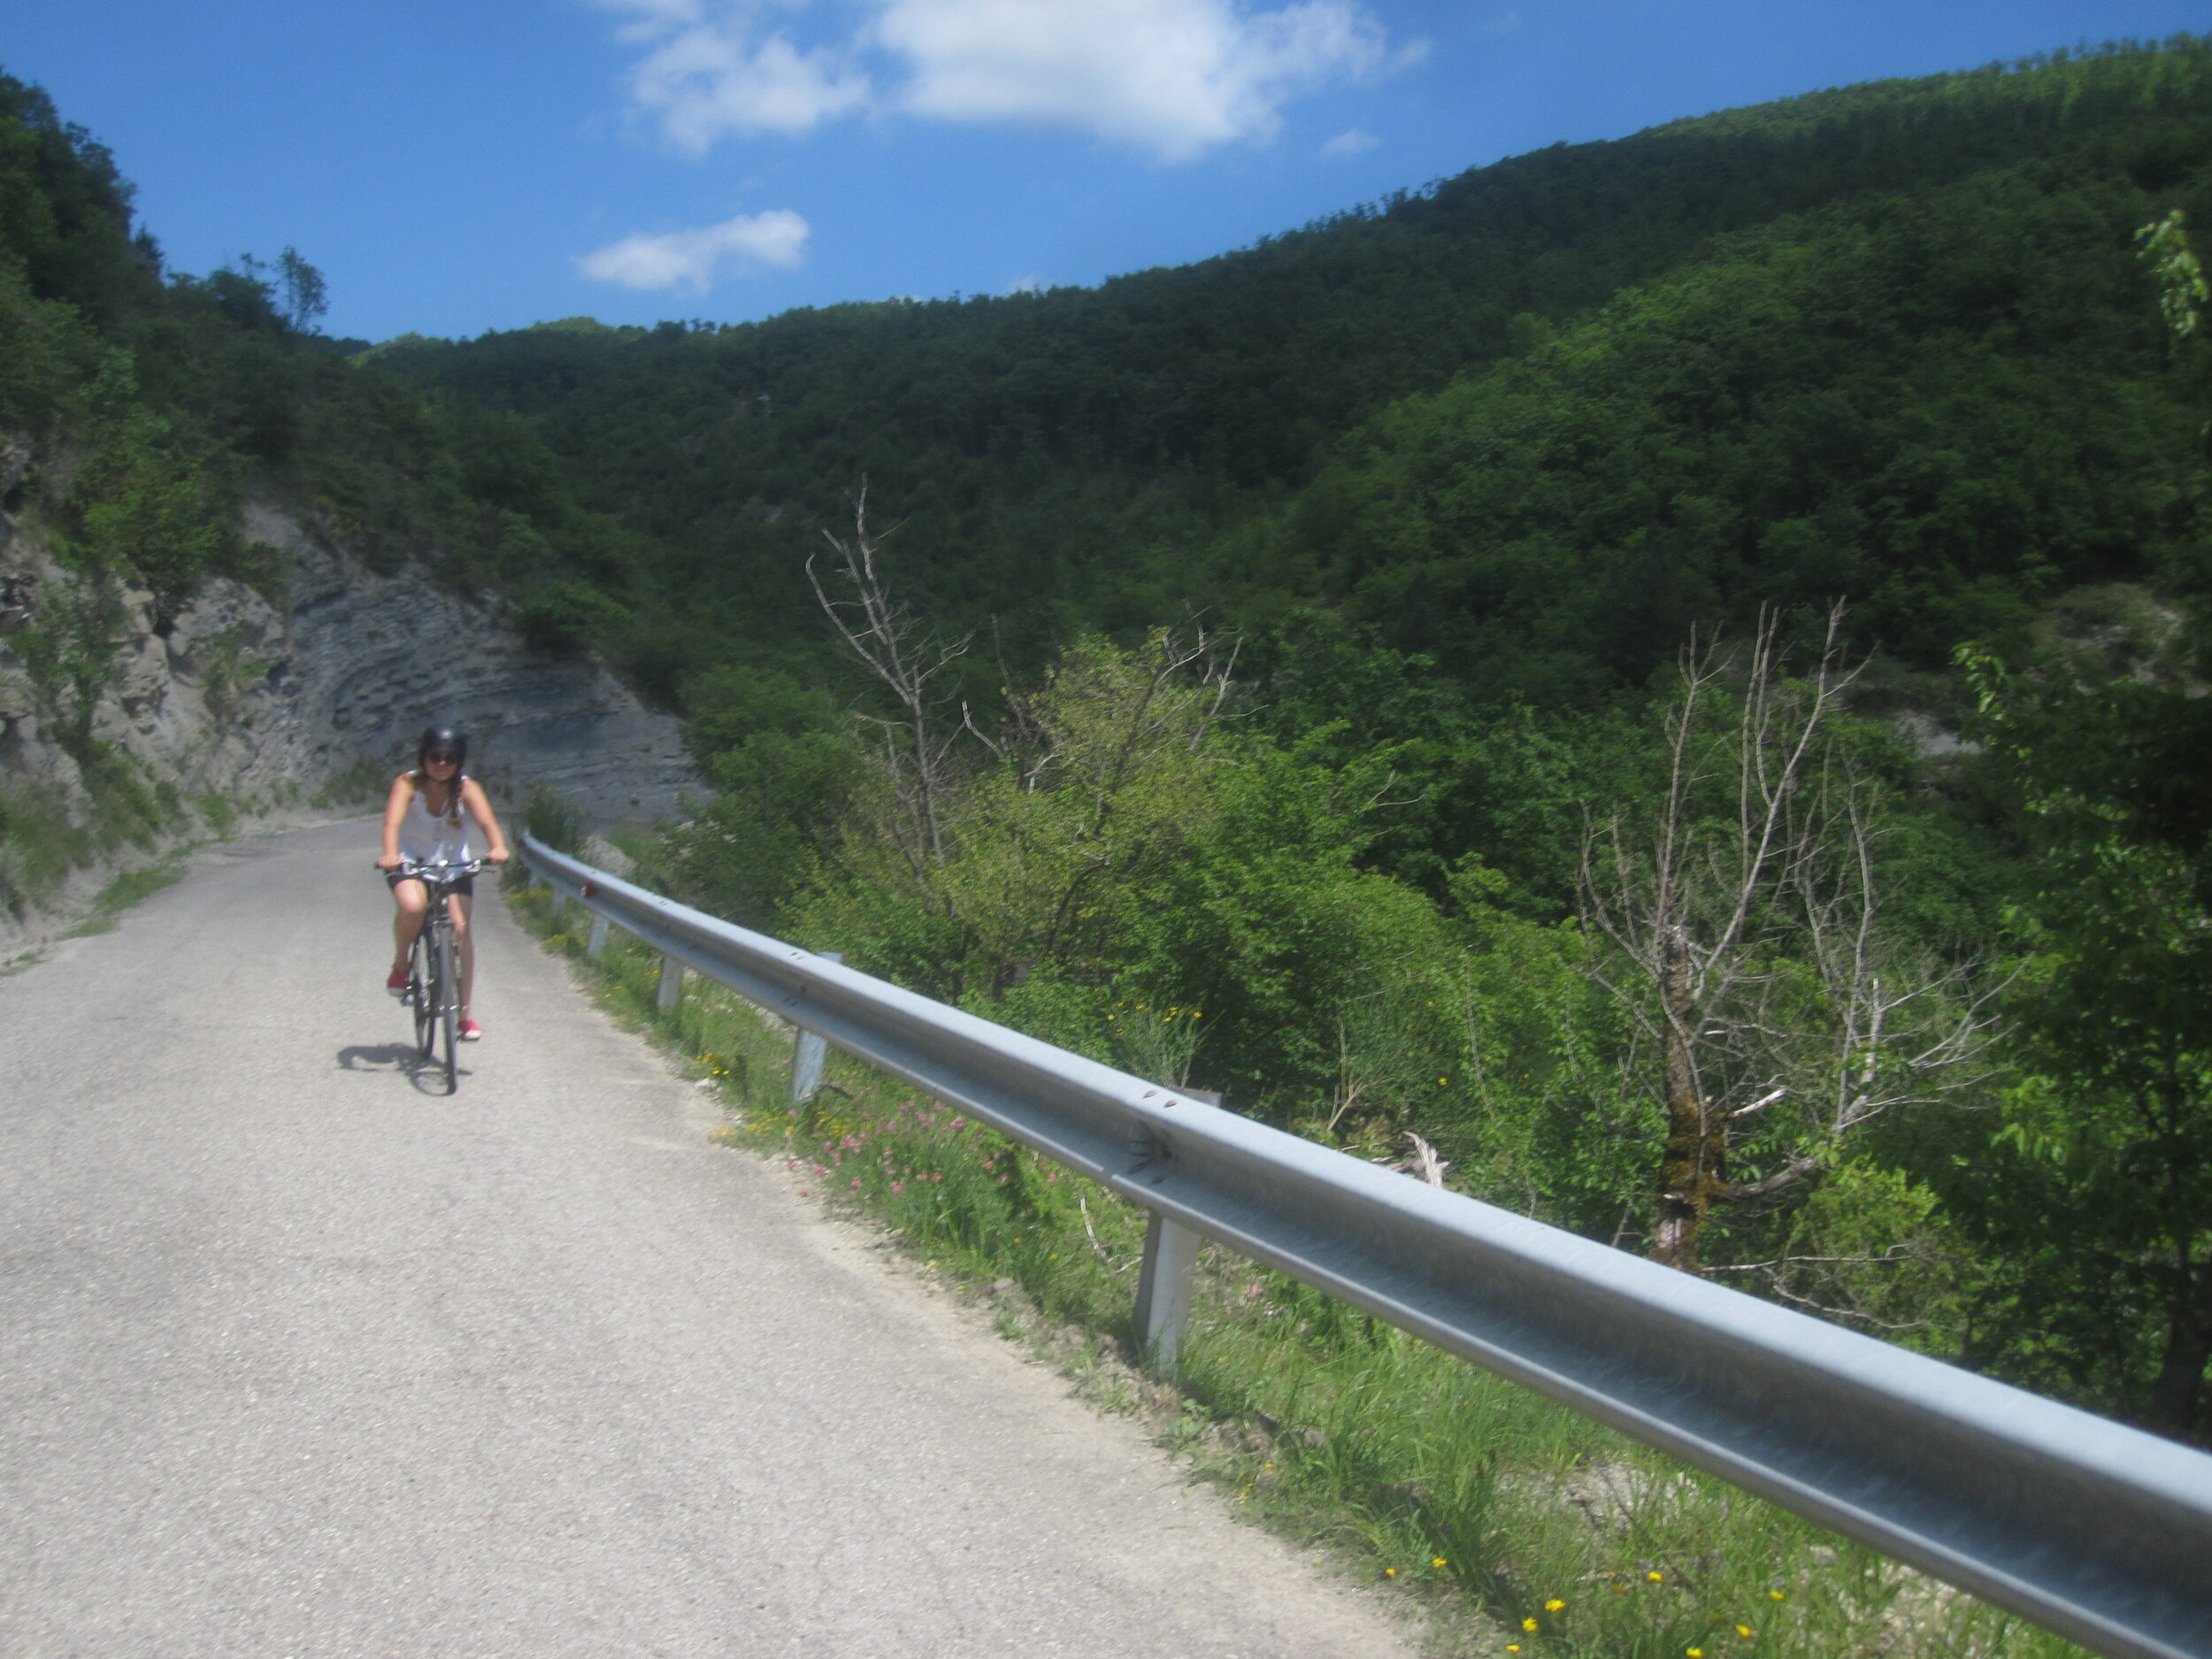  Hire a range of bikes from HikeandBike, Sansepolcro. Hills or valley?  